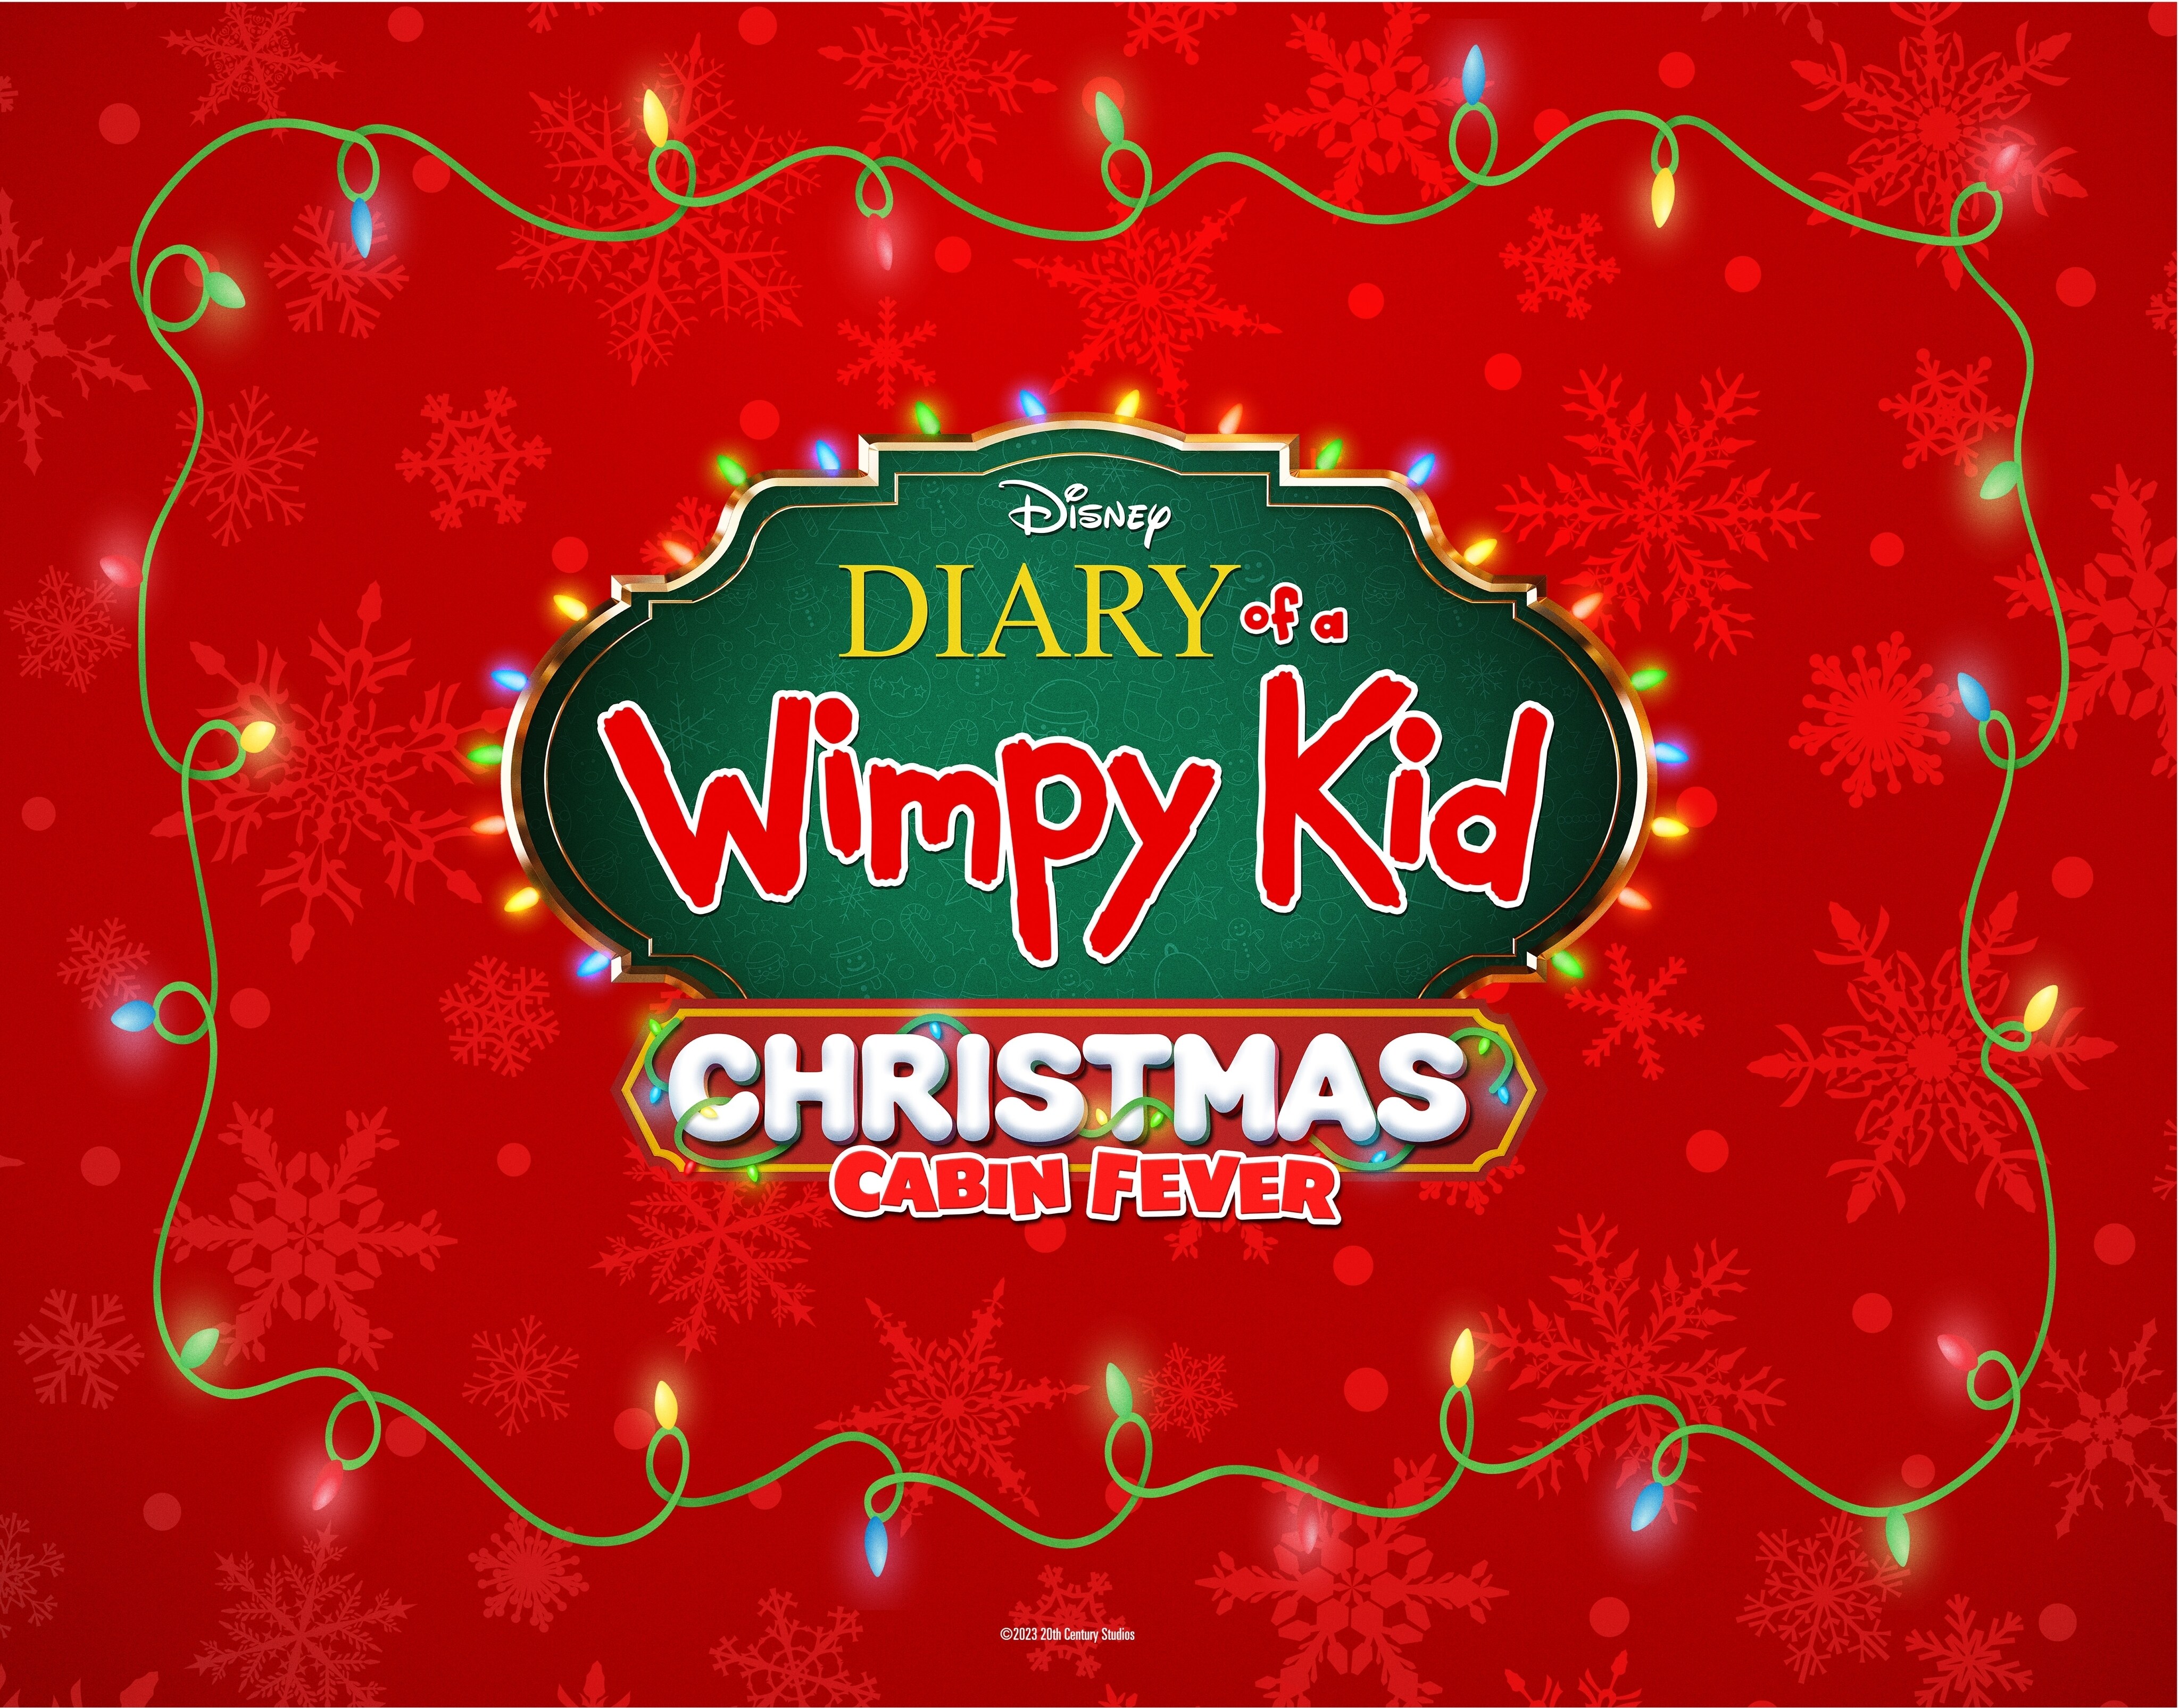 Diary Of A Wimpy Kid Christmas: Cabin Fever” To Debut December 8